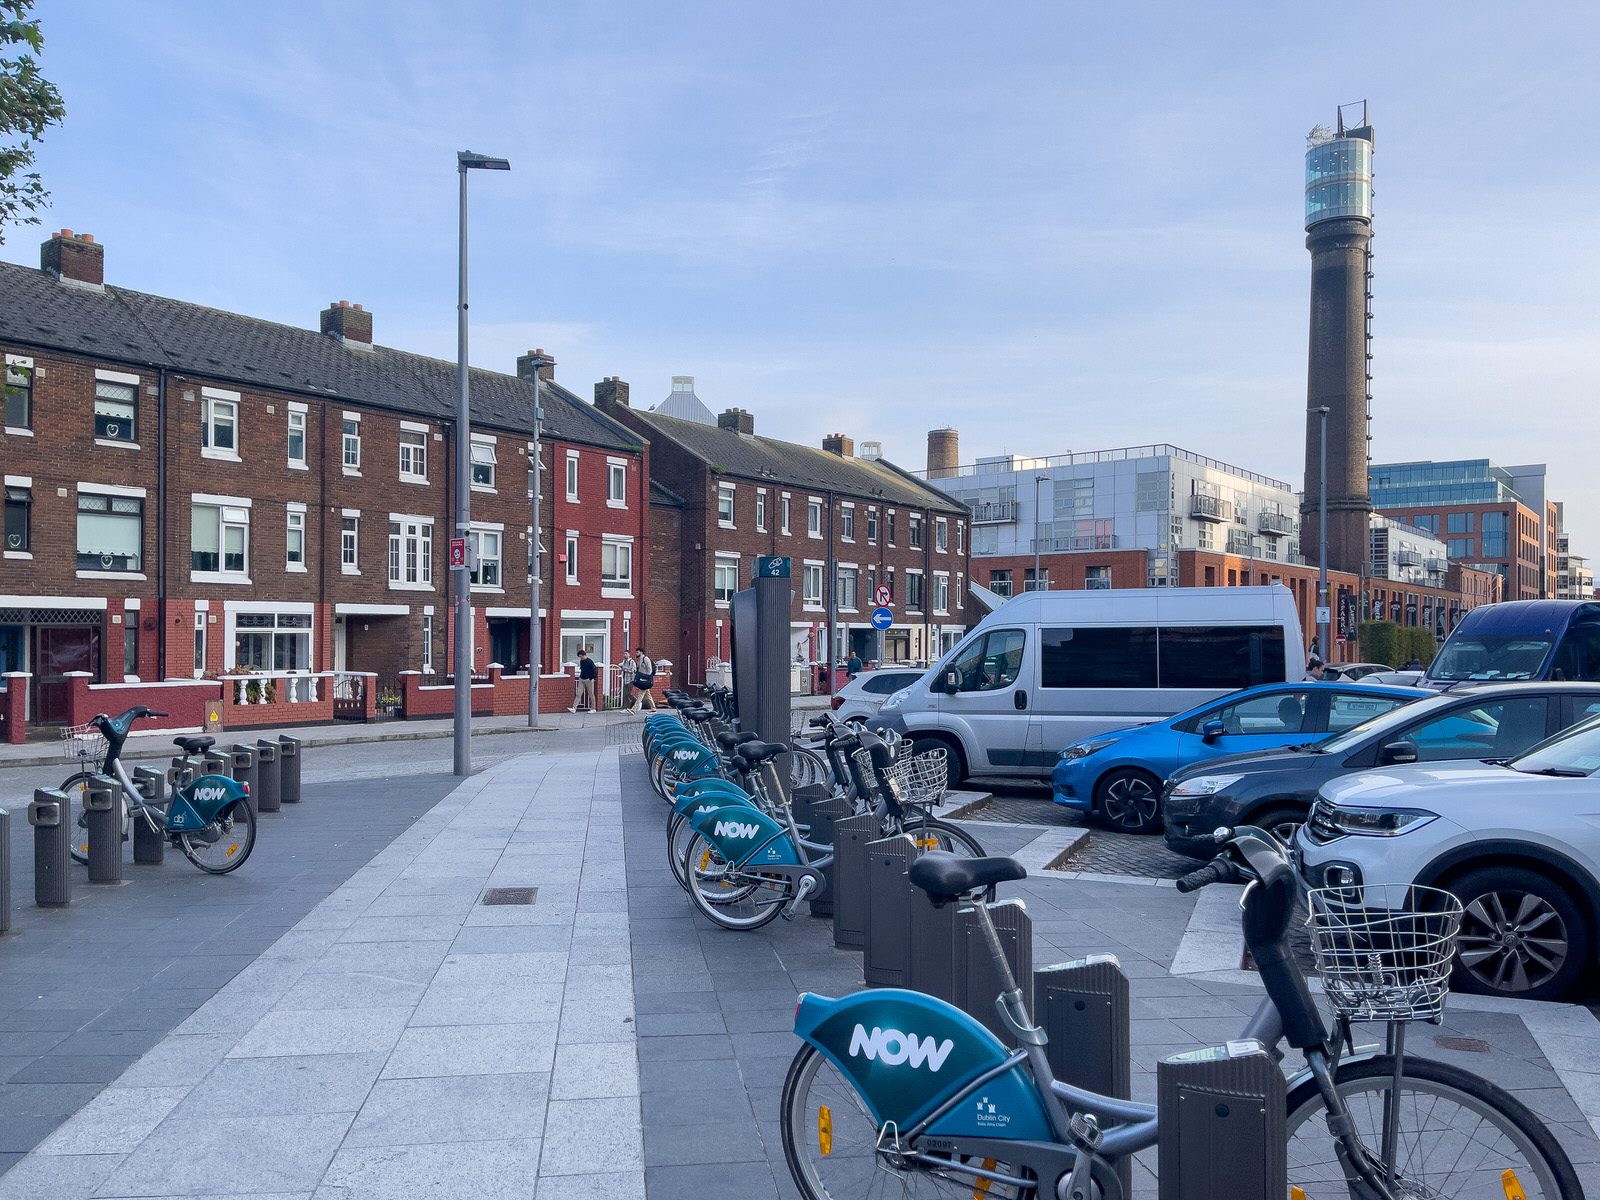 DUBLINBIKES DOCKING STATION 42 [SMITHFIELD PLAZA OR SQUARE - CHOOSE WHICH YOU PREFER] 006